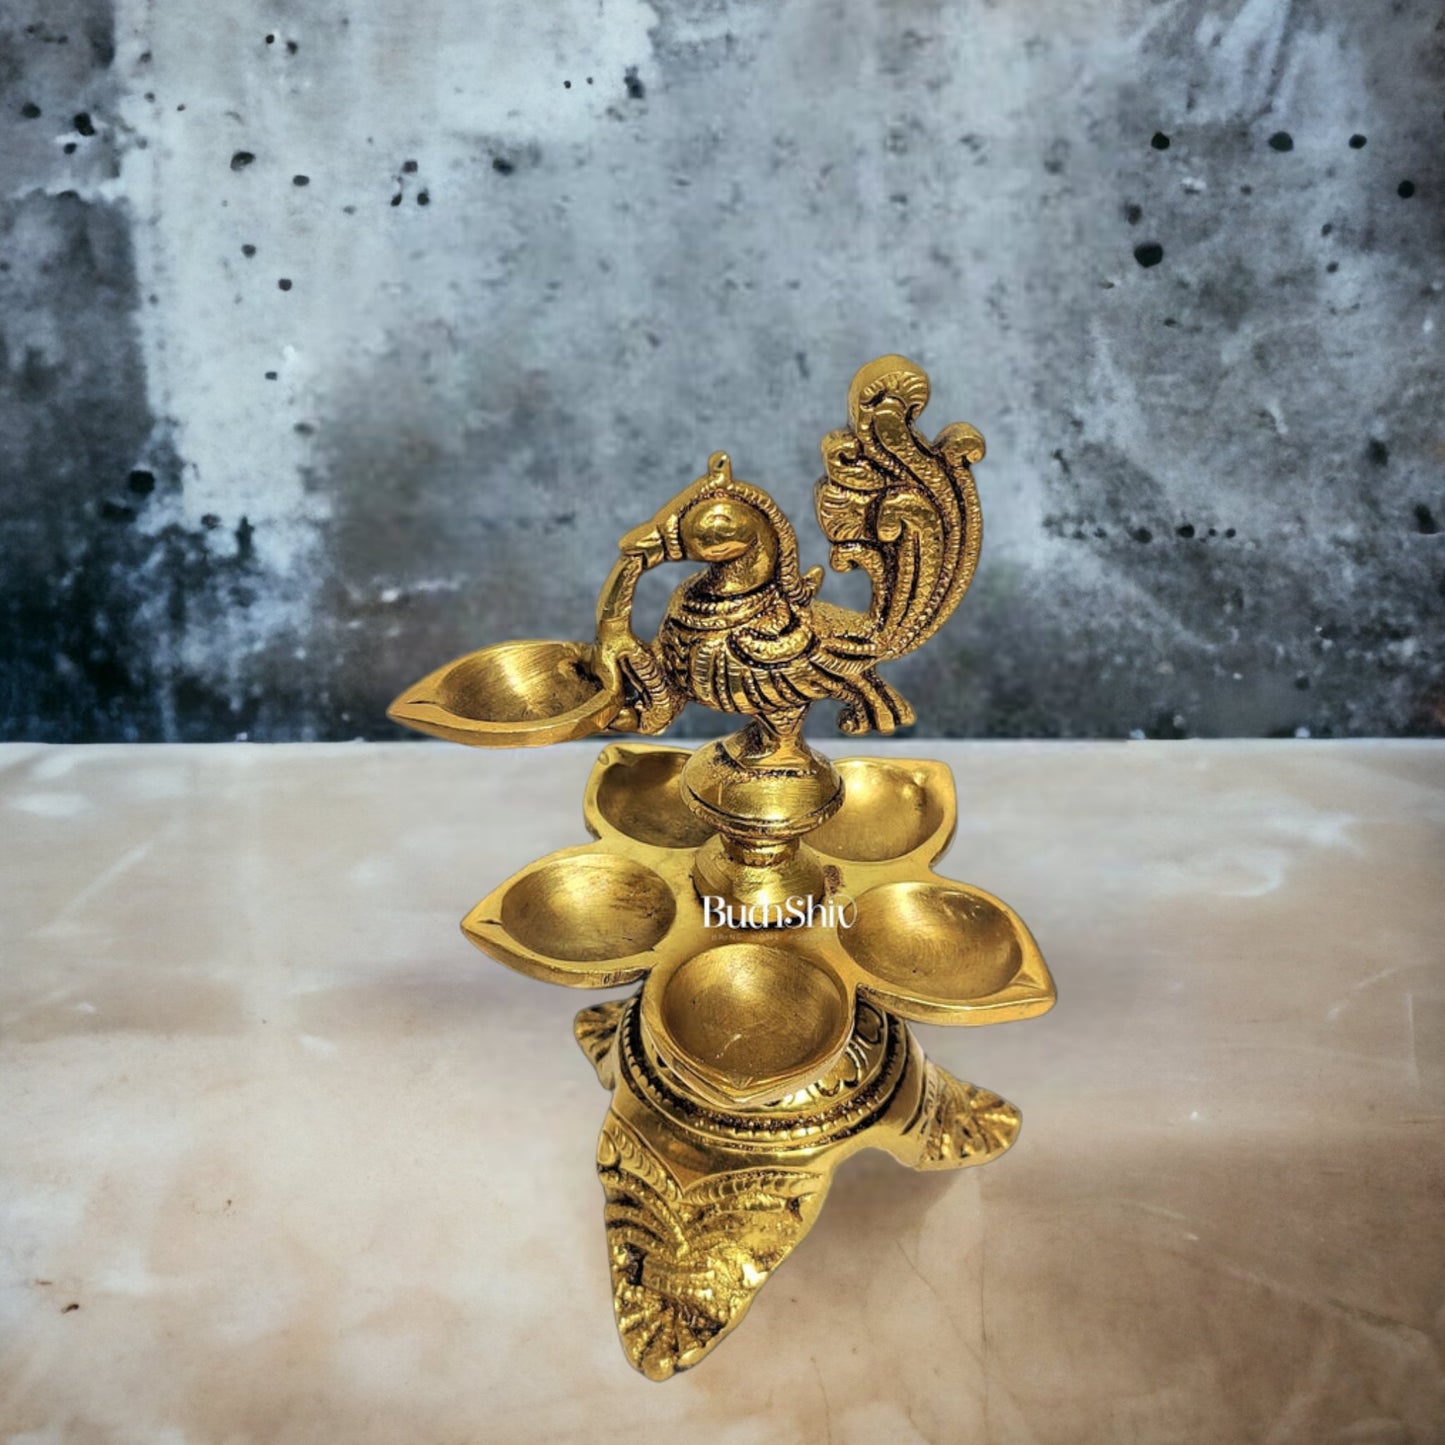 Unique Pure Fine Brass Annam Oil Deepam Lamp with 6 Diyas (SMALL) - Budhshiv.com